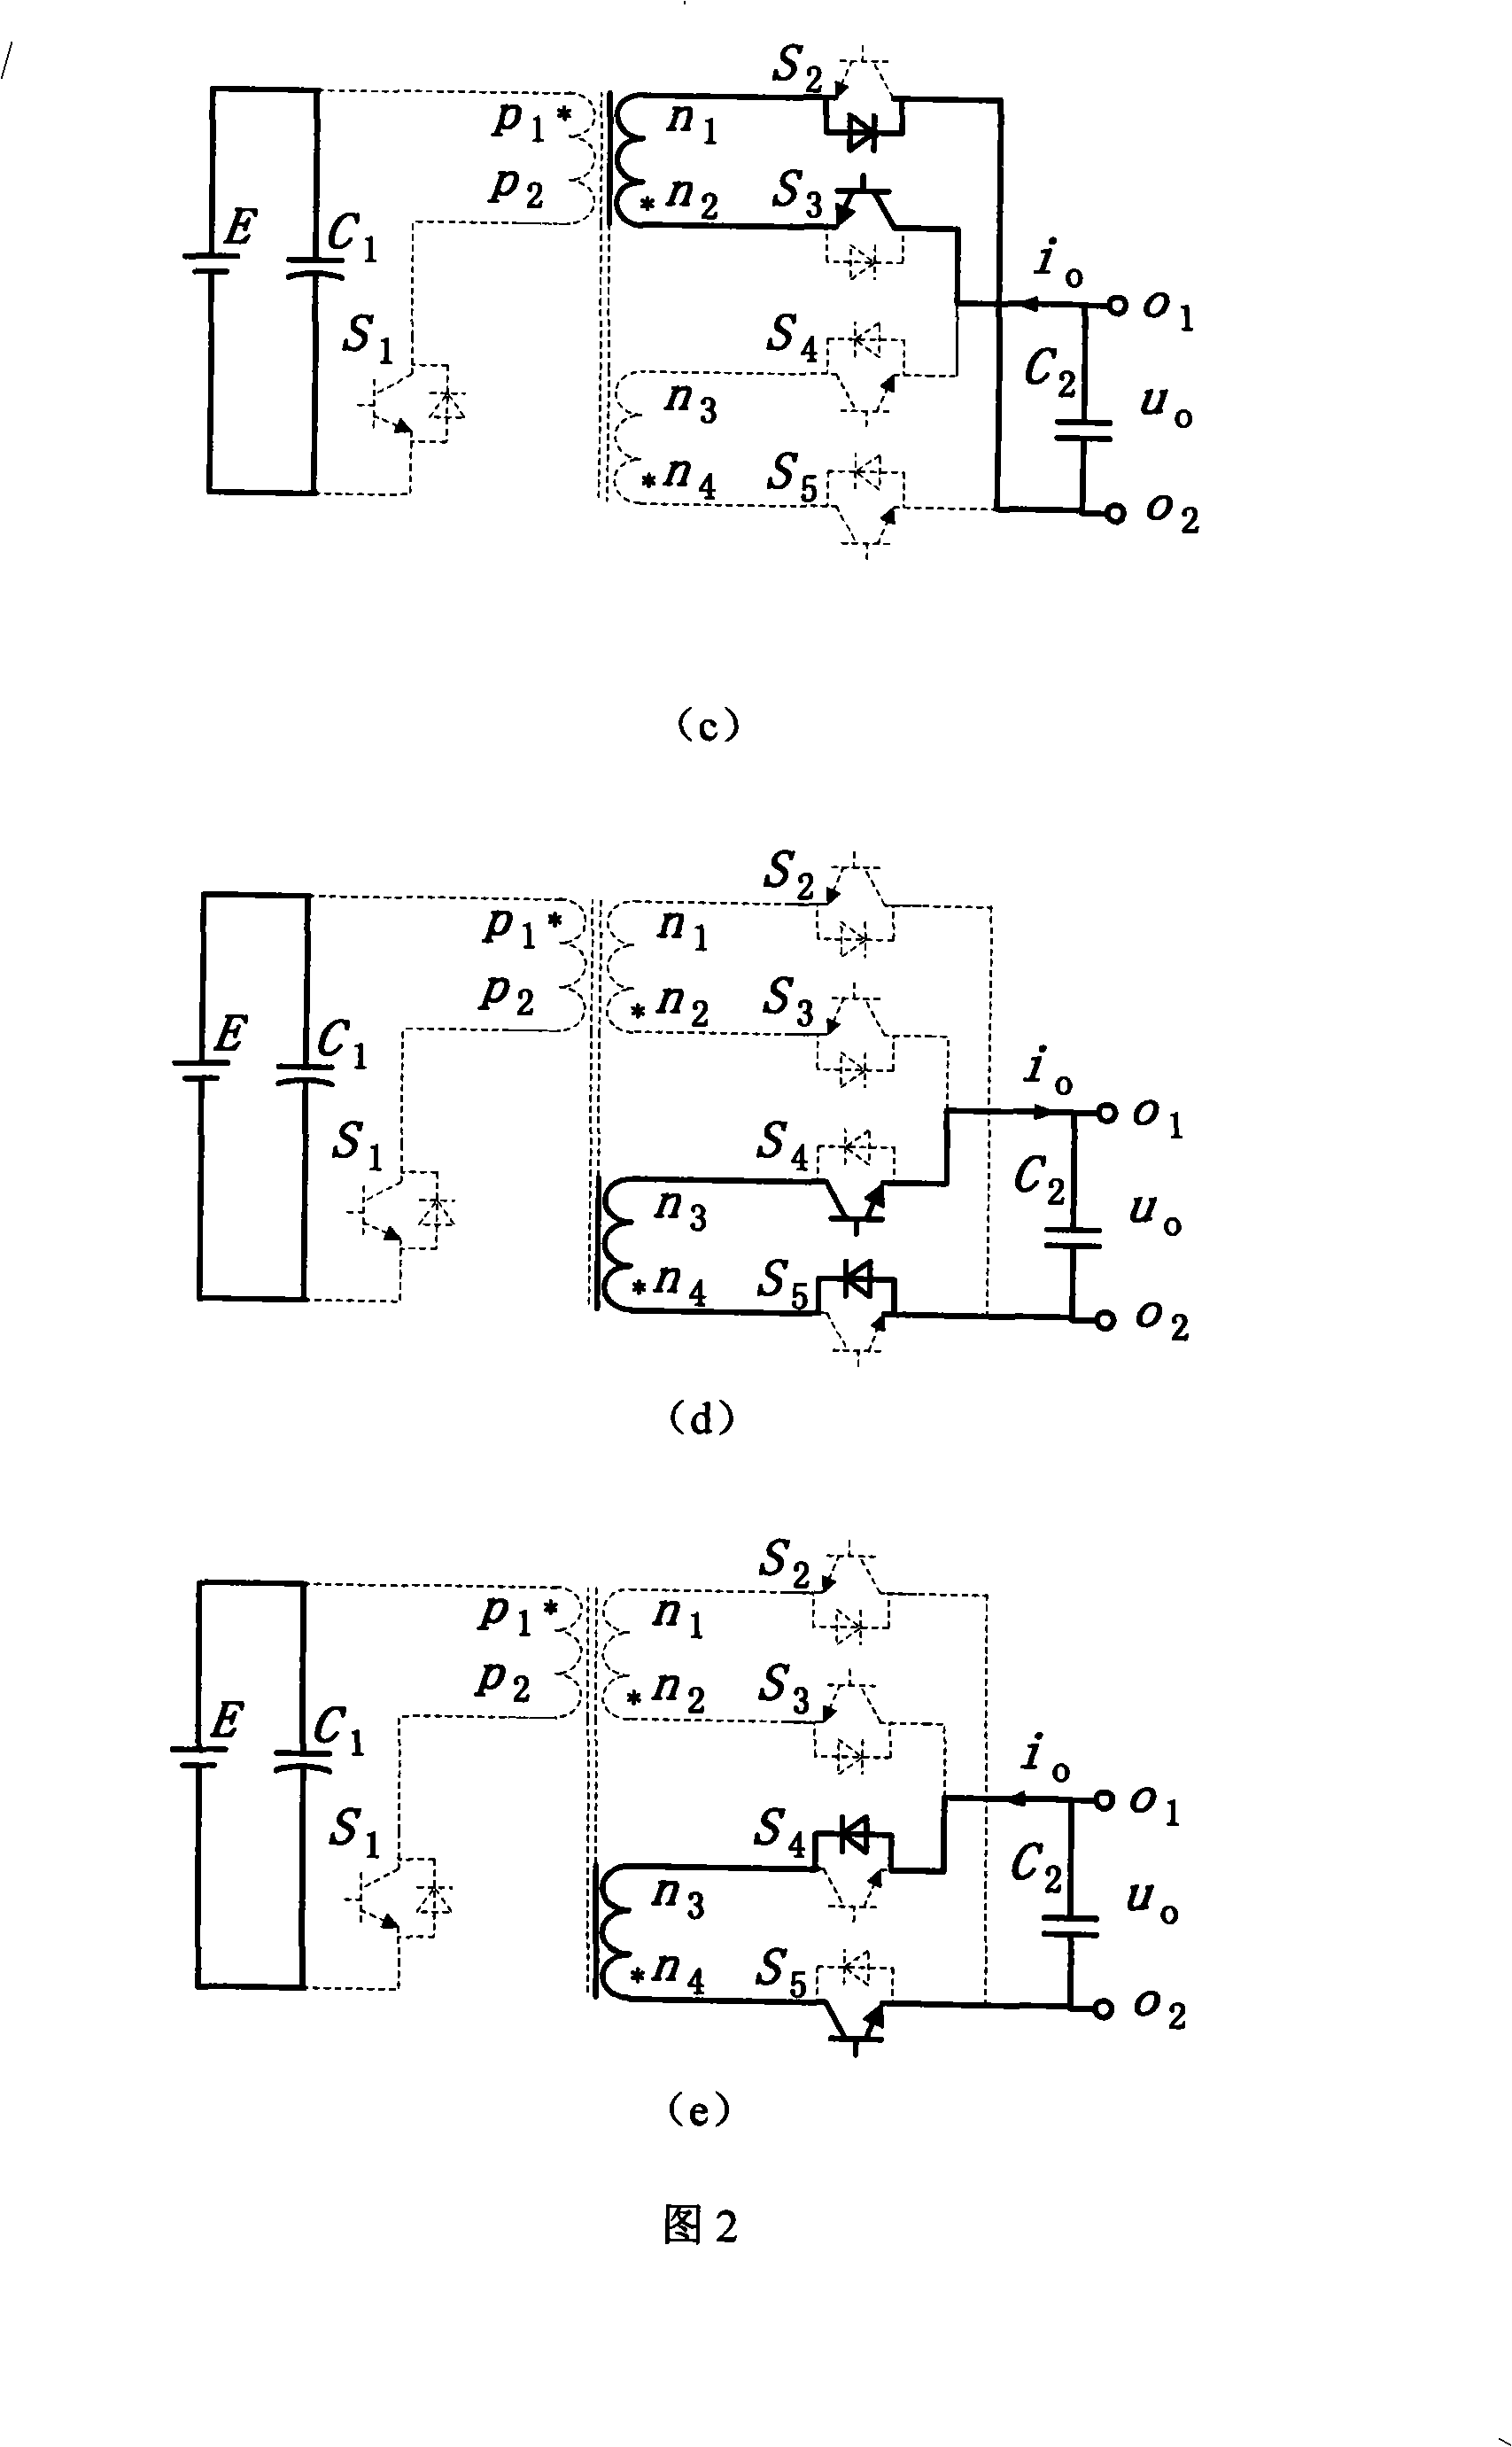 Inverse-excitation type single-stage inverter for interconnected photovoltaic power generation system